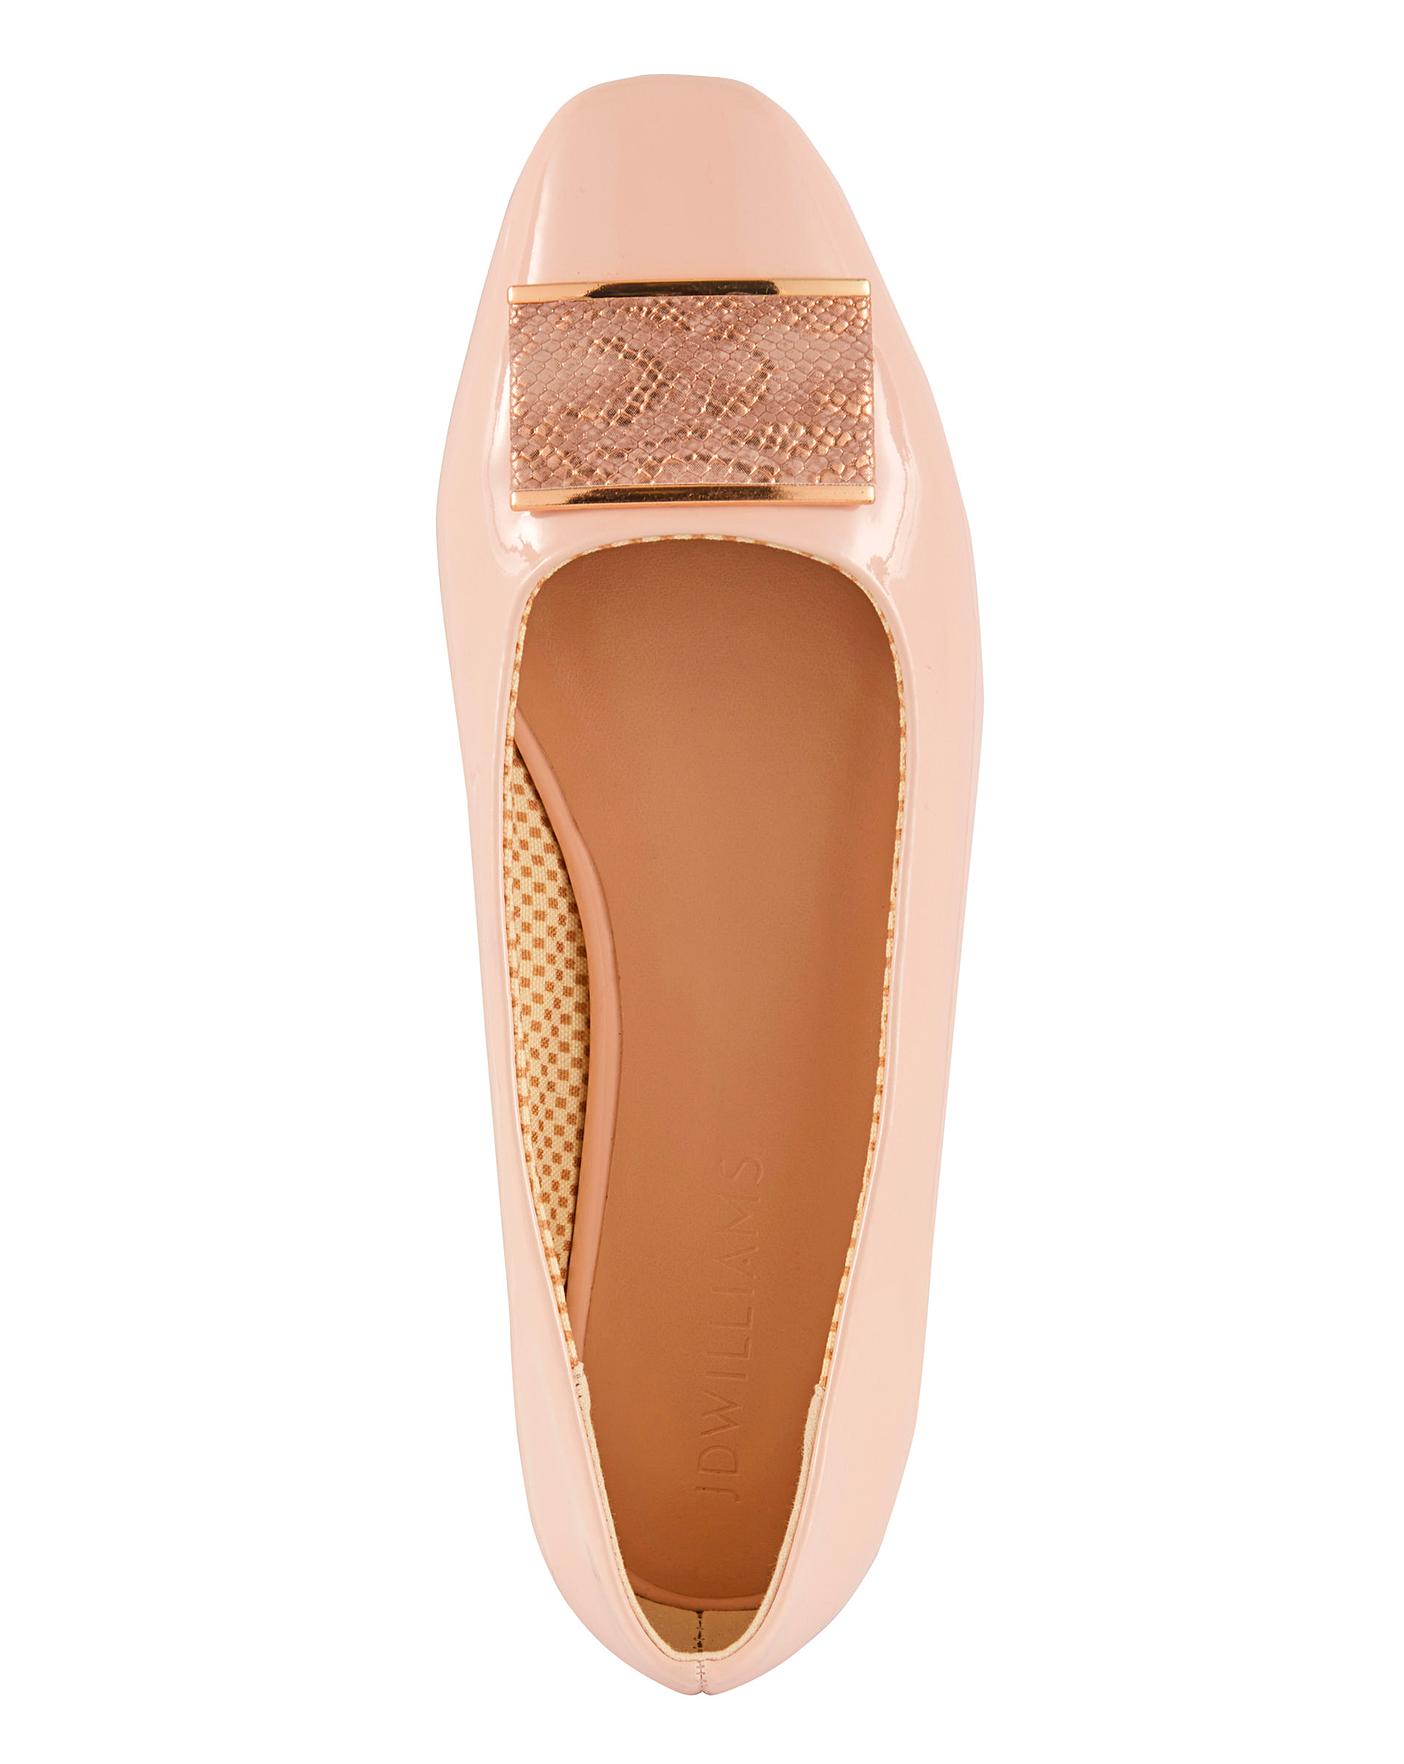 JD Williams Nude Square Toe Trim Ballerina Shoes Wide E Fit, 51% OFF